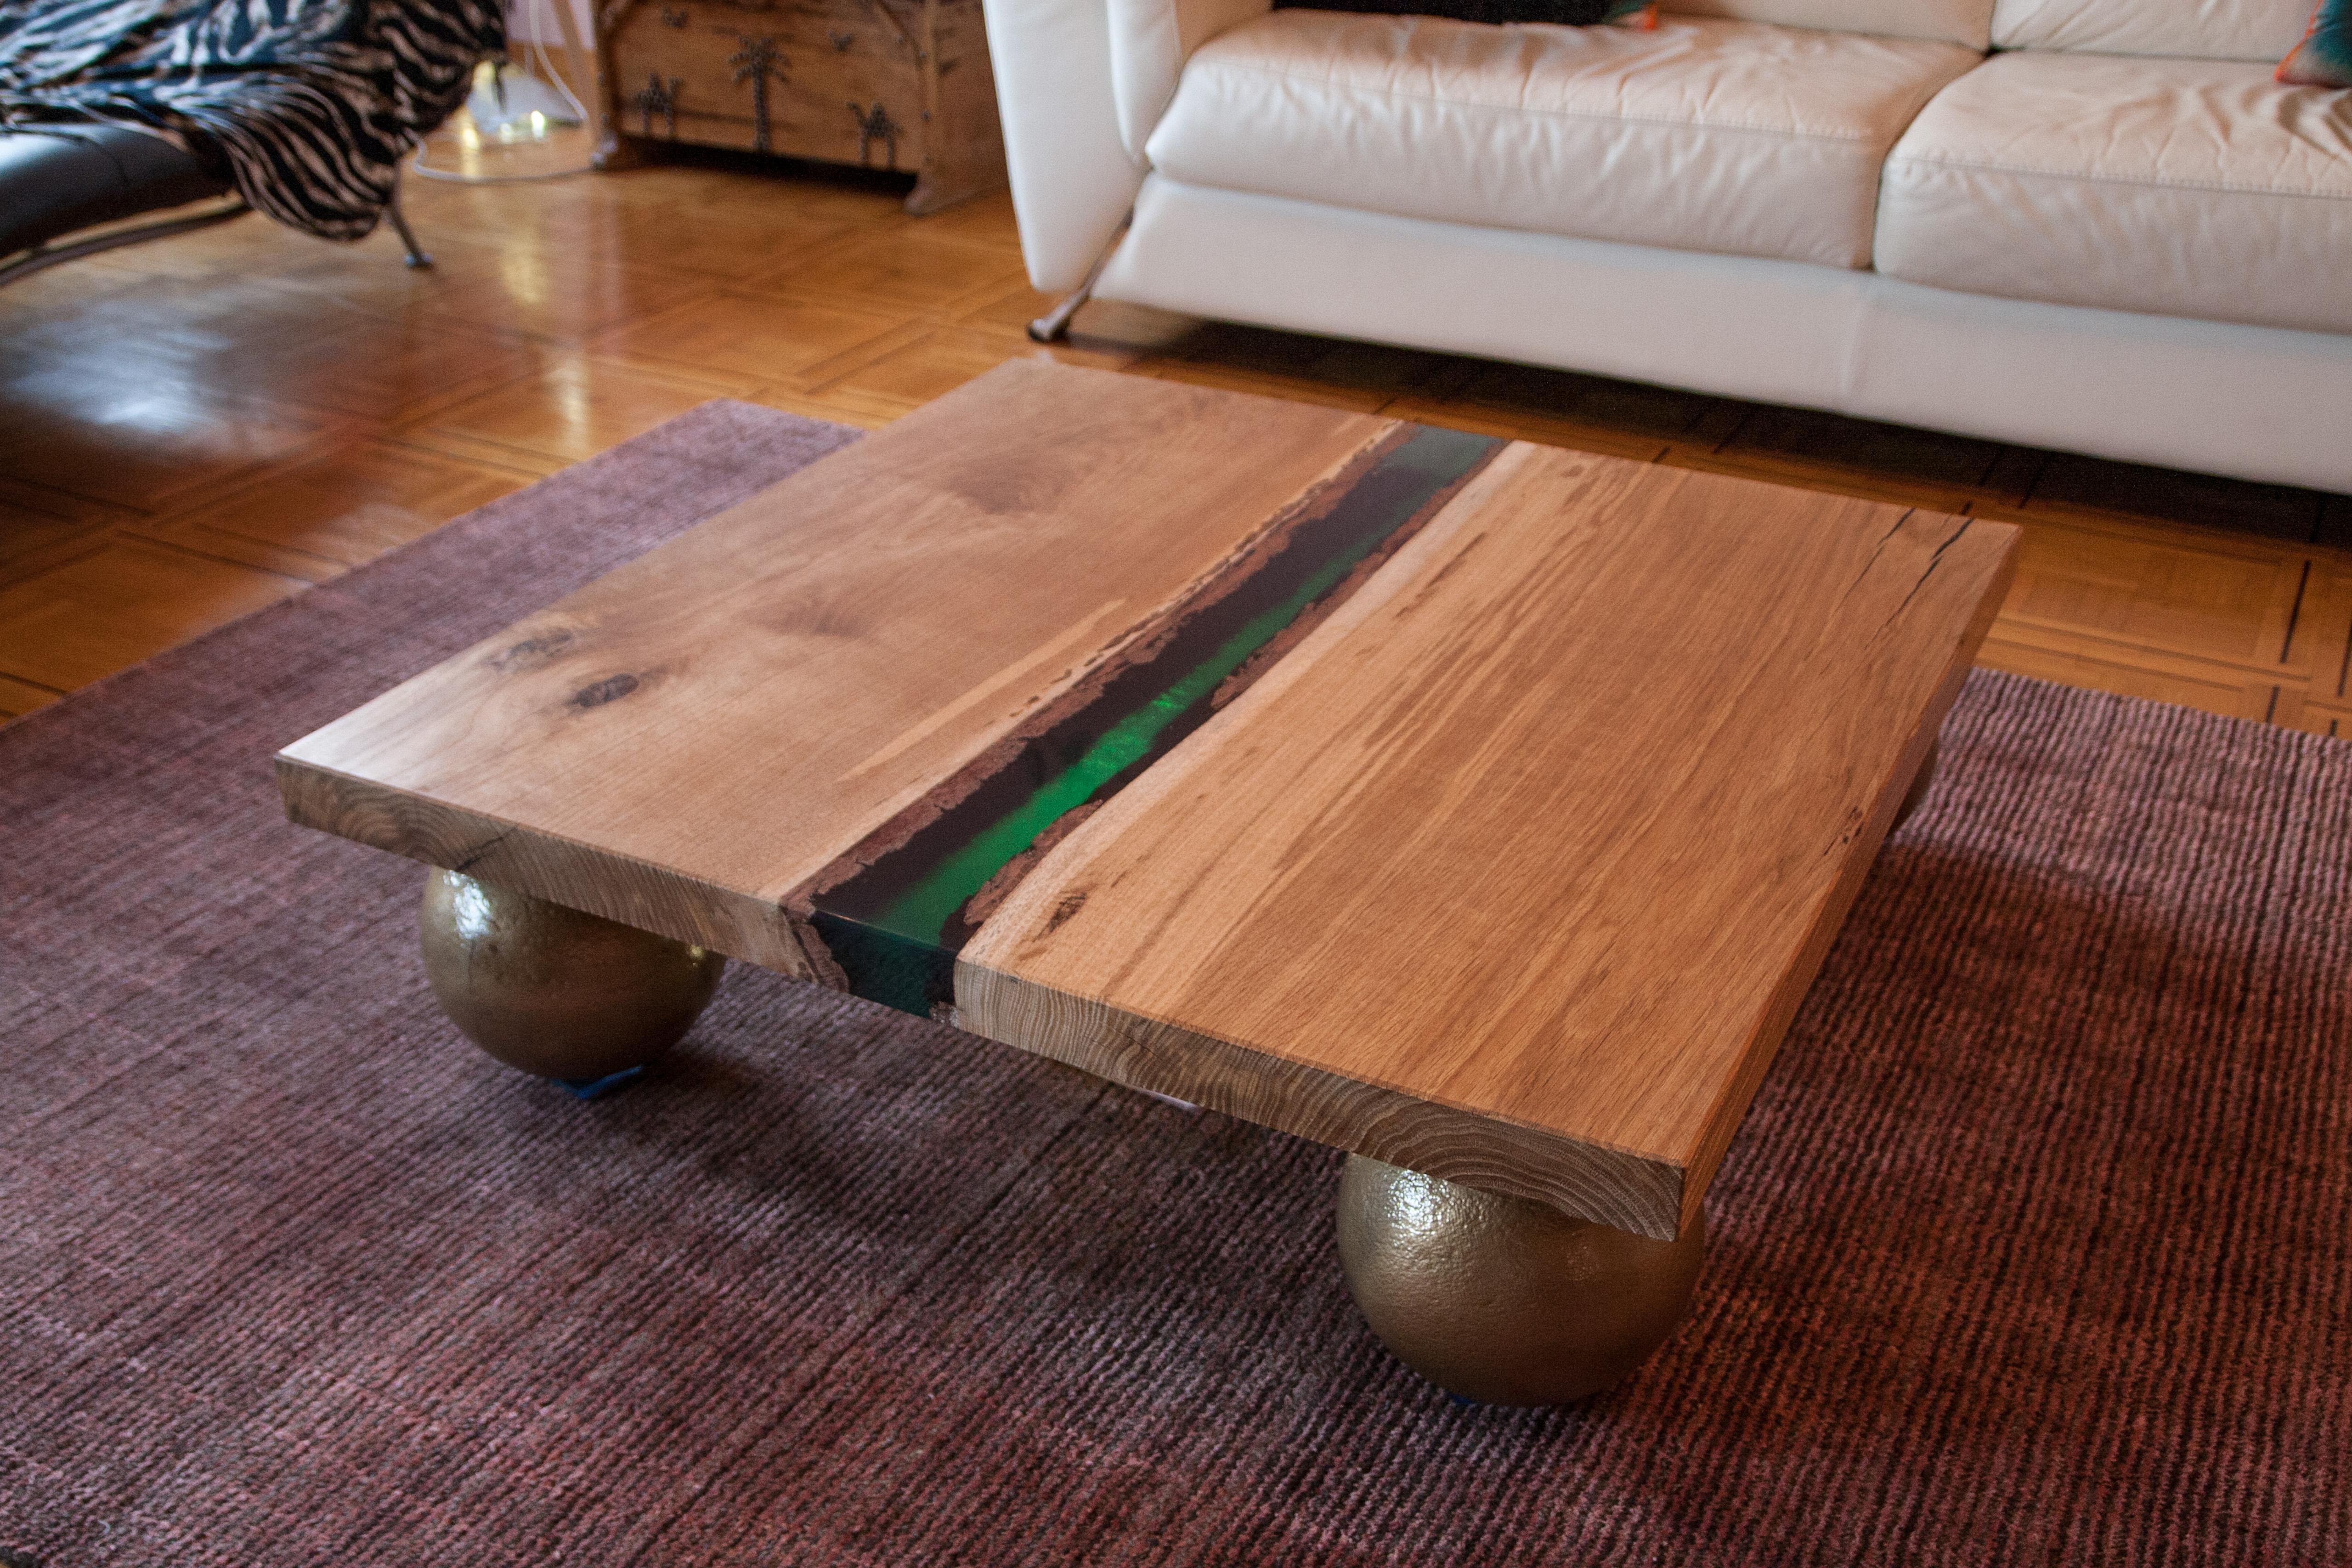 Contemporary Durmast Coffee Table with Emerald Resin Band and Bowling Balls Base (Moderne) im Angebot